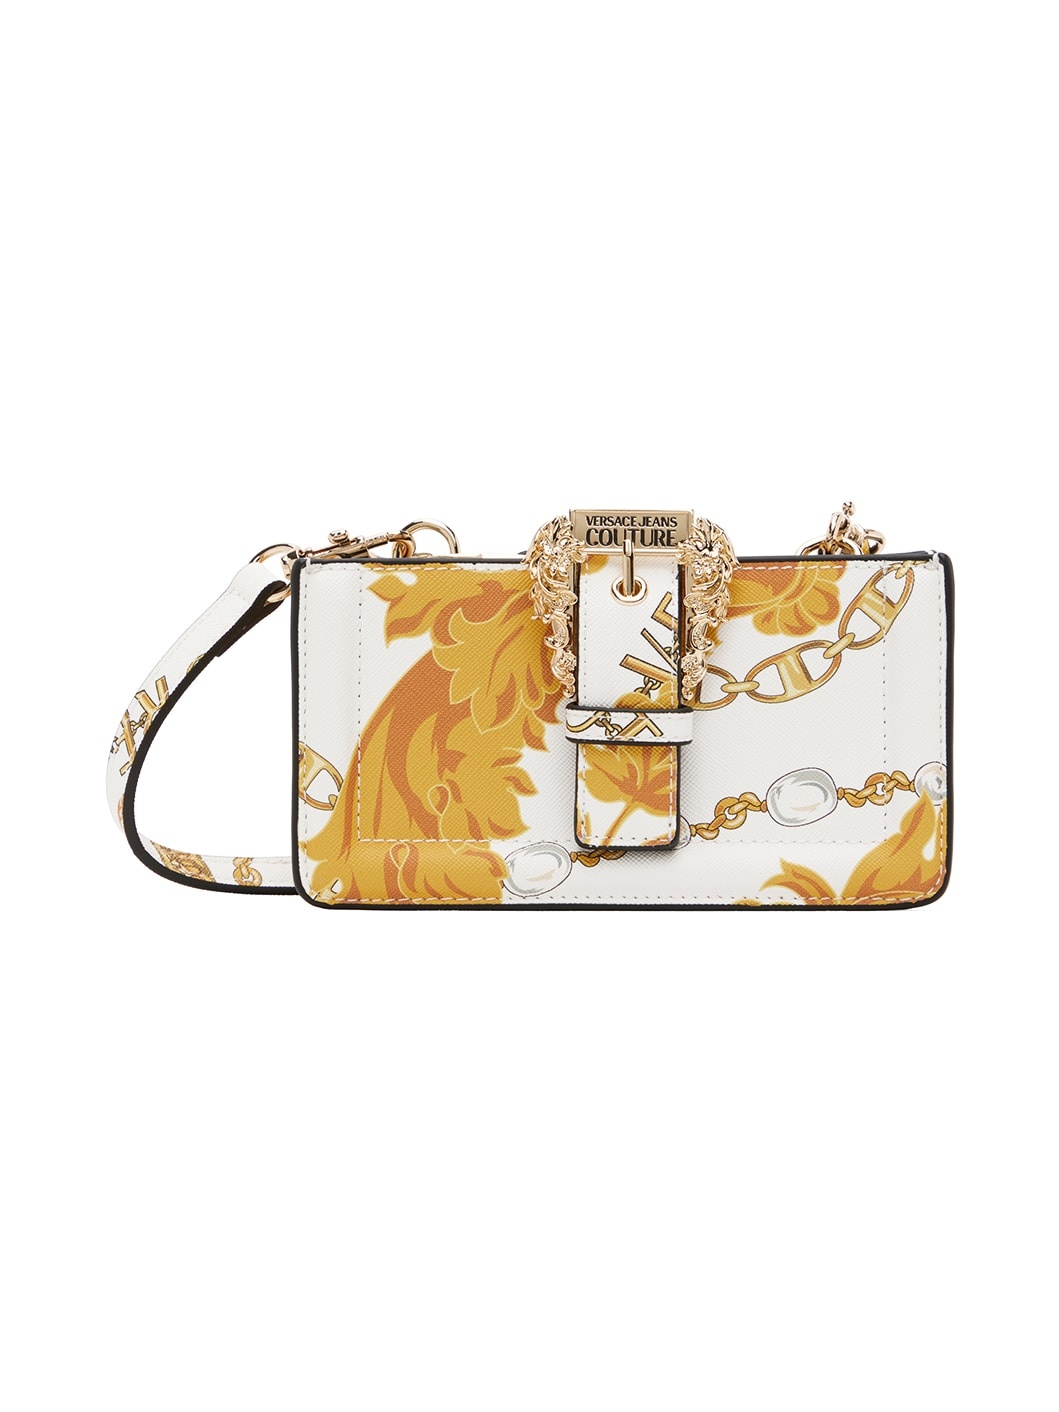 White & Gold Pin-Buckle Bag - 1